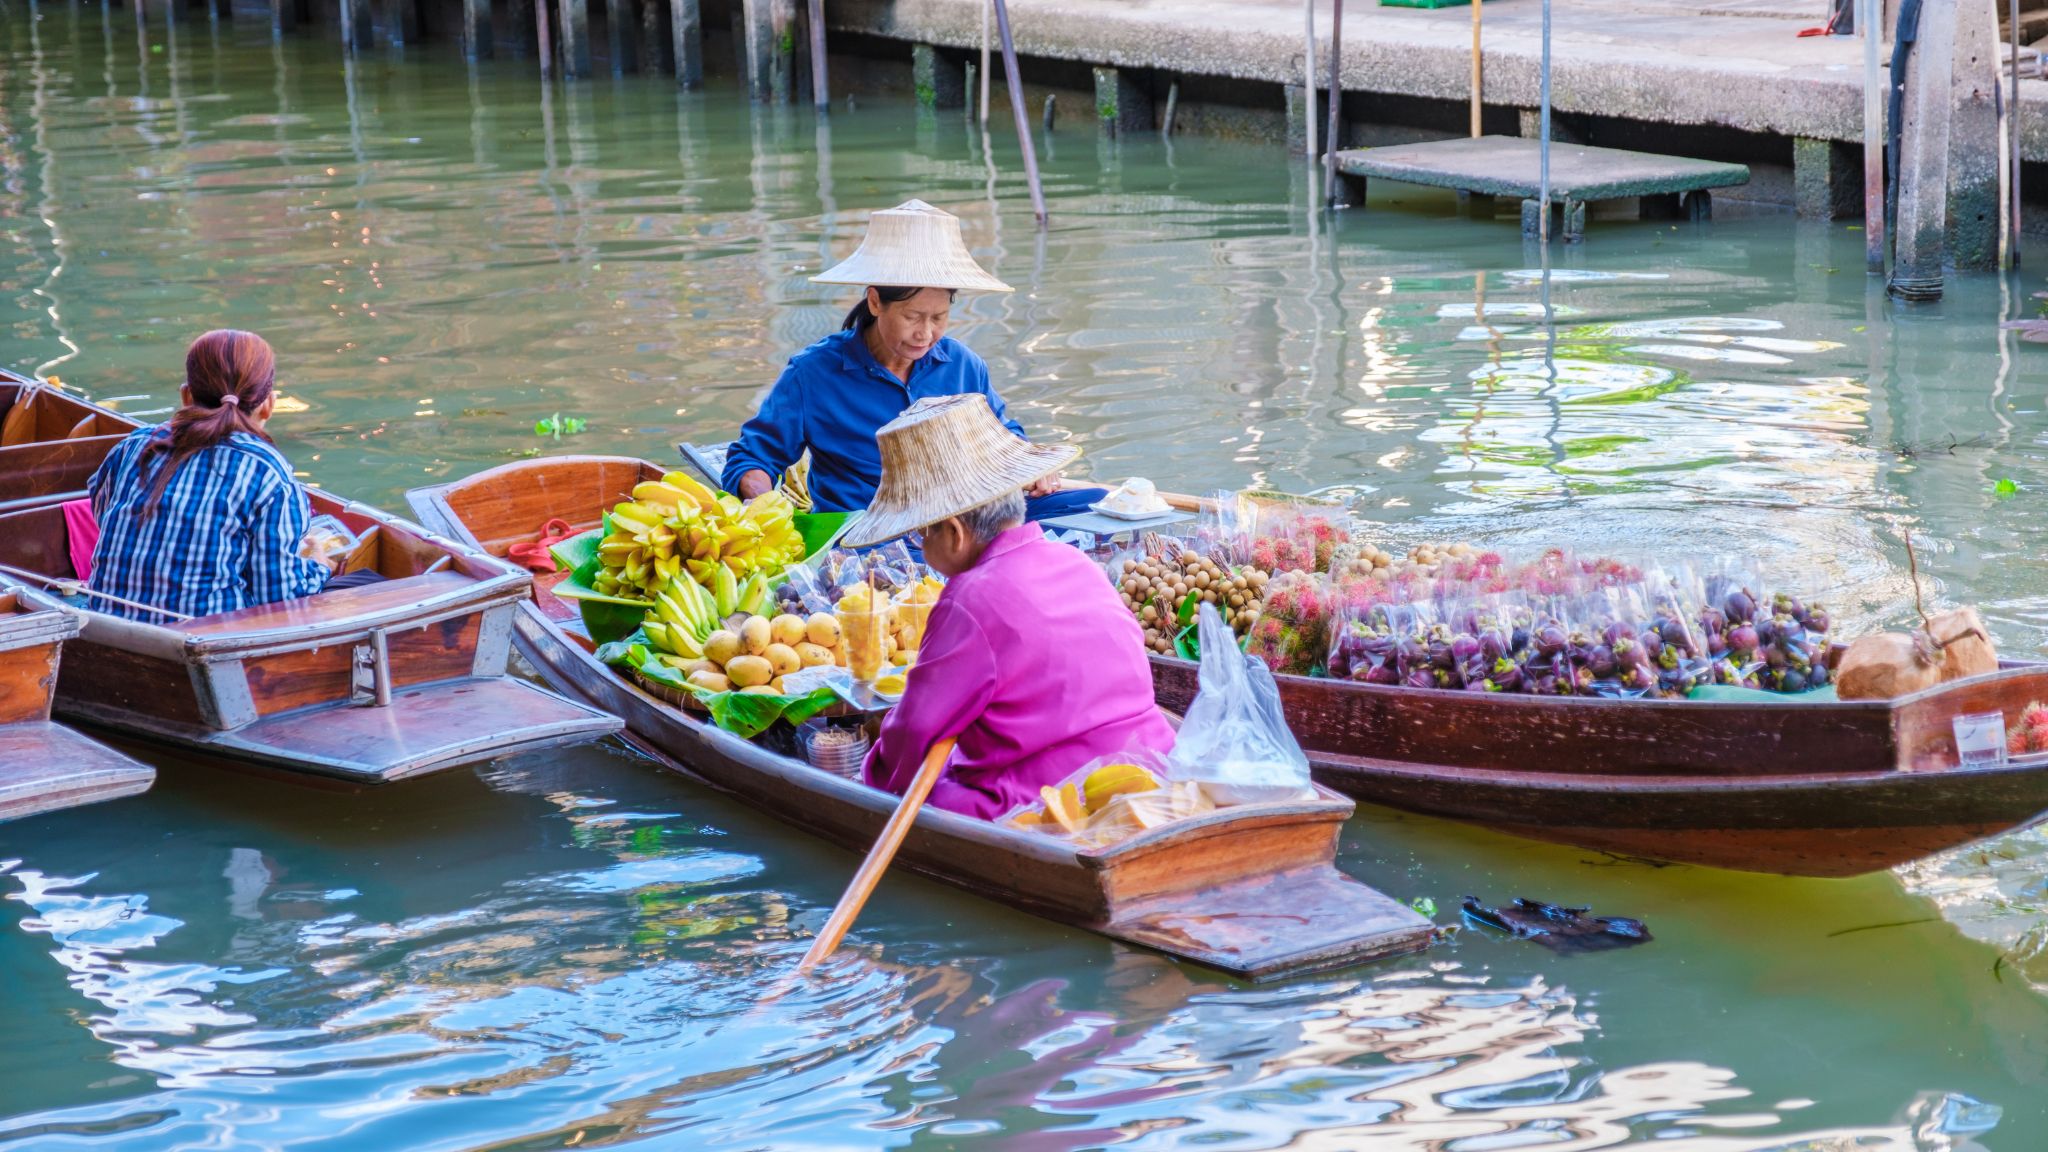 Day 3 Discover The Daily Life In Damnoen Saduak Floating Market